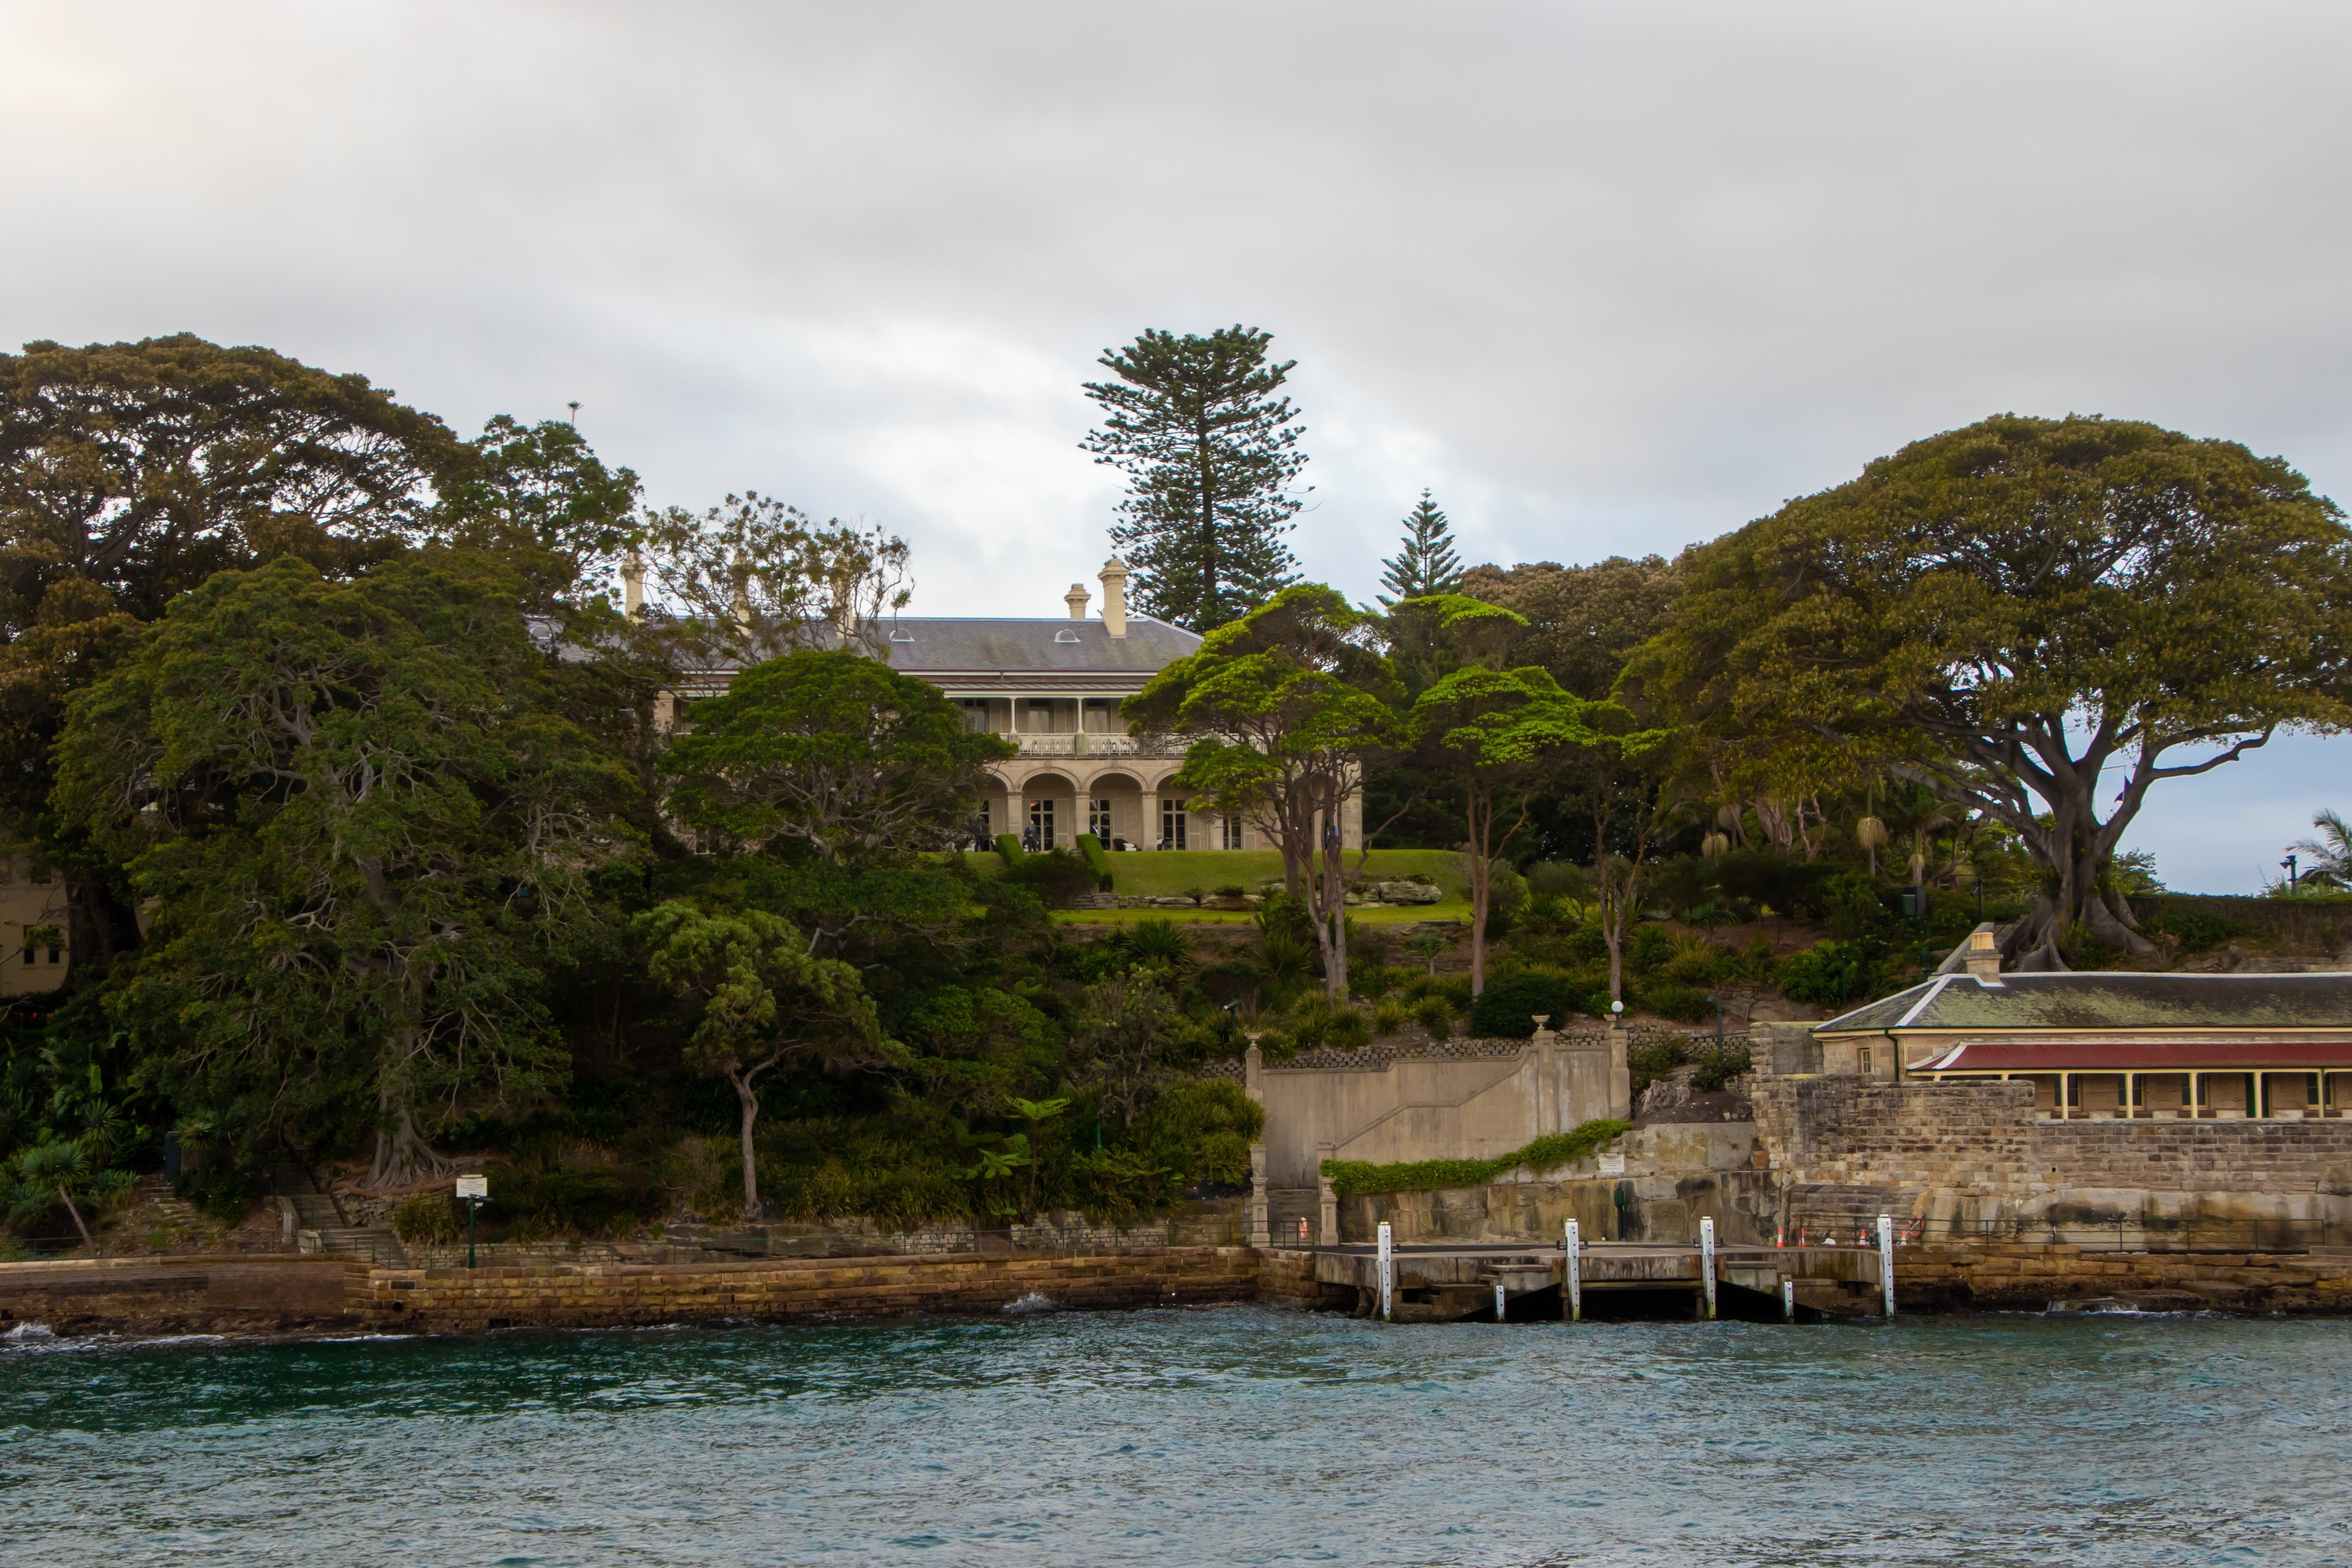 Kirribilli House is the secondary official residence of the Prime Minister of Australia.